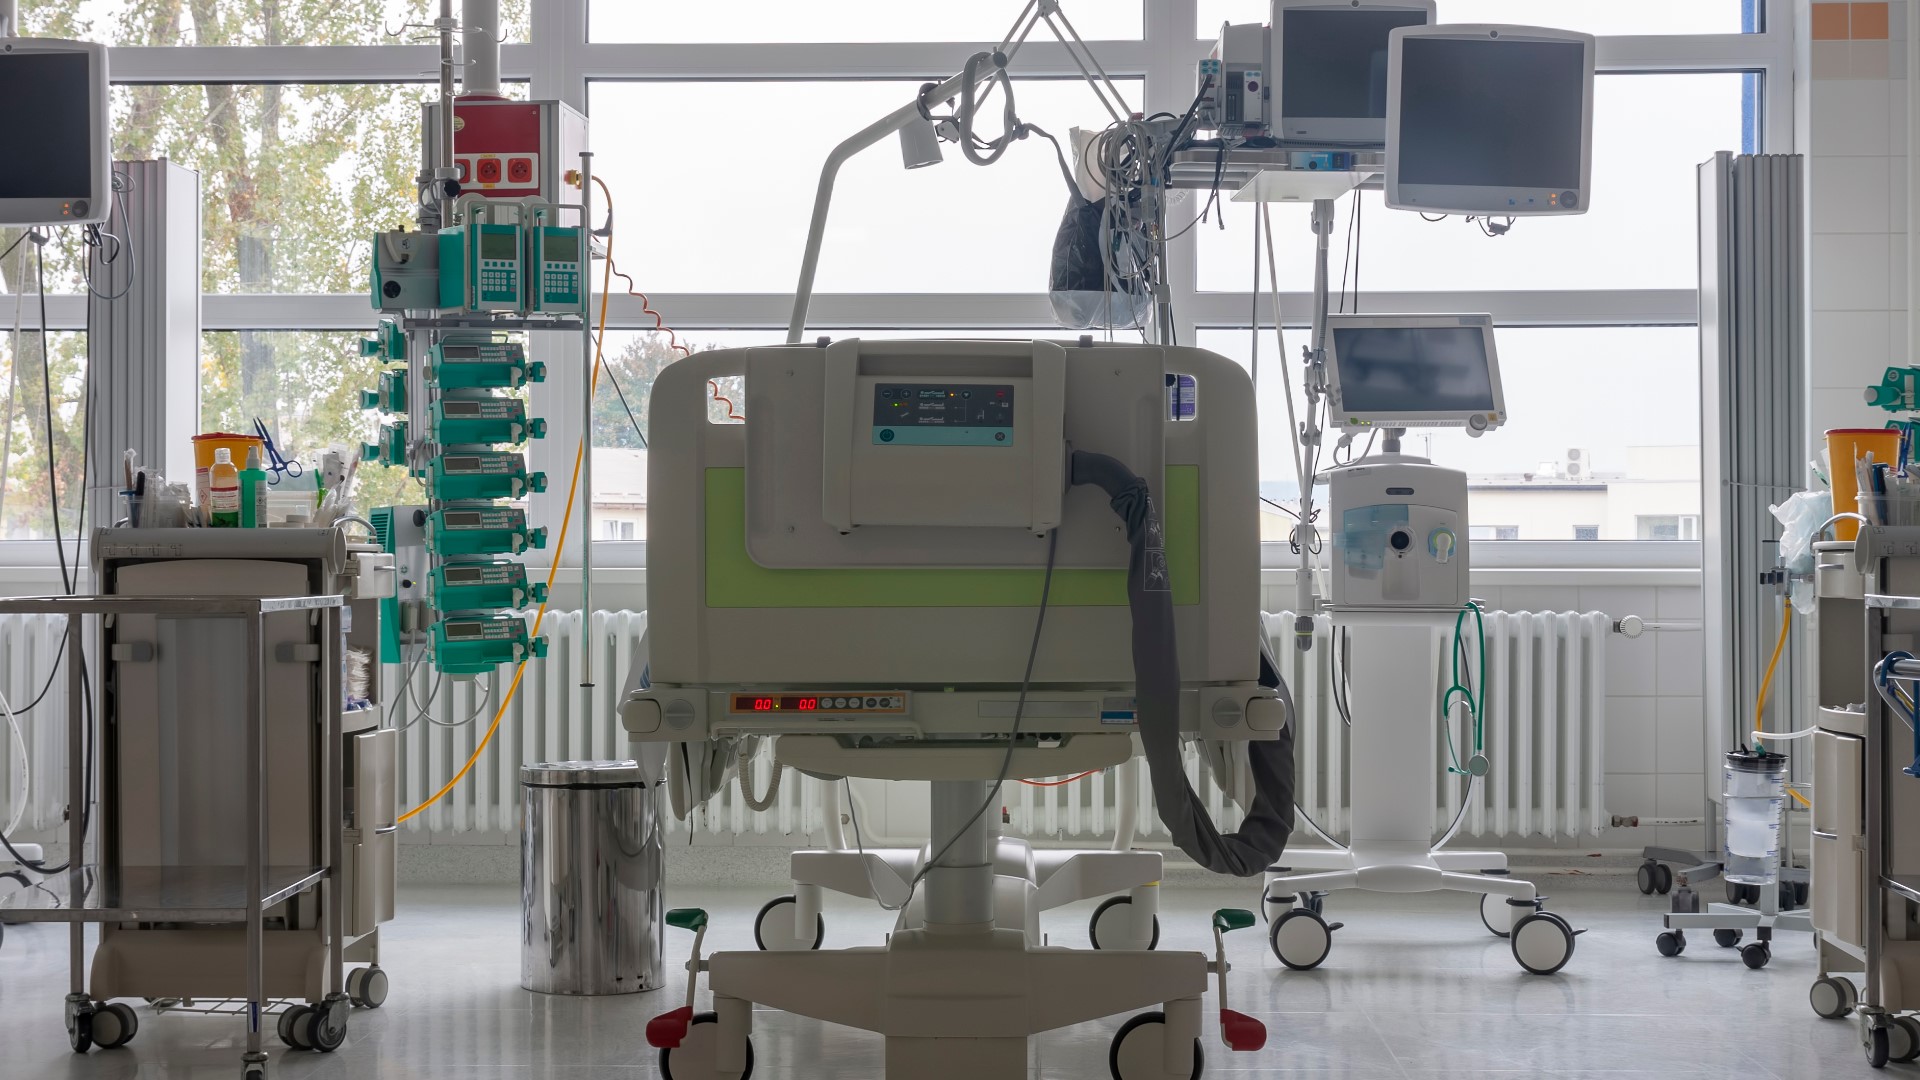 ICU are meant for the treatment of the most critically ill and injured patients such as those suffering from heart attacks, strokes, burns and car crashes.